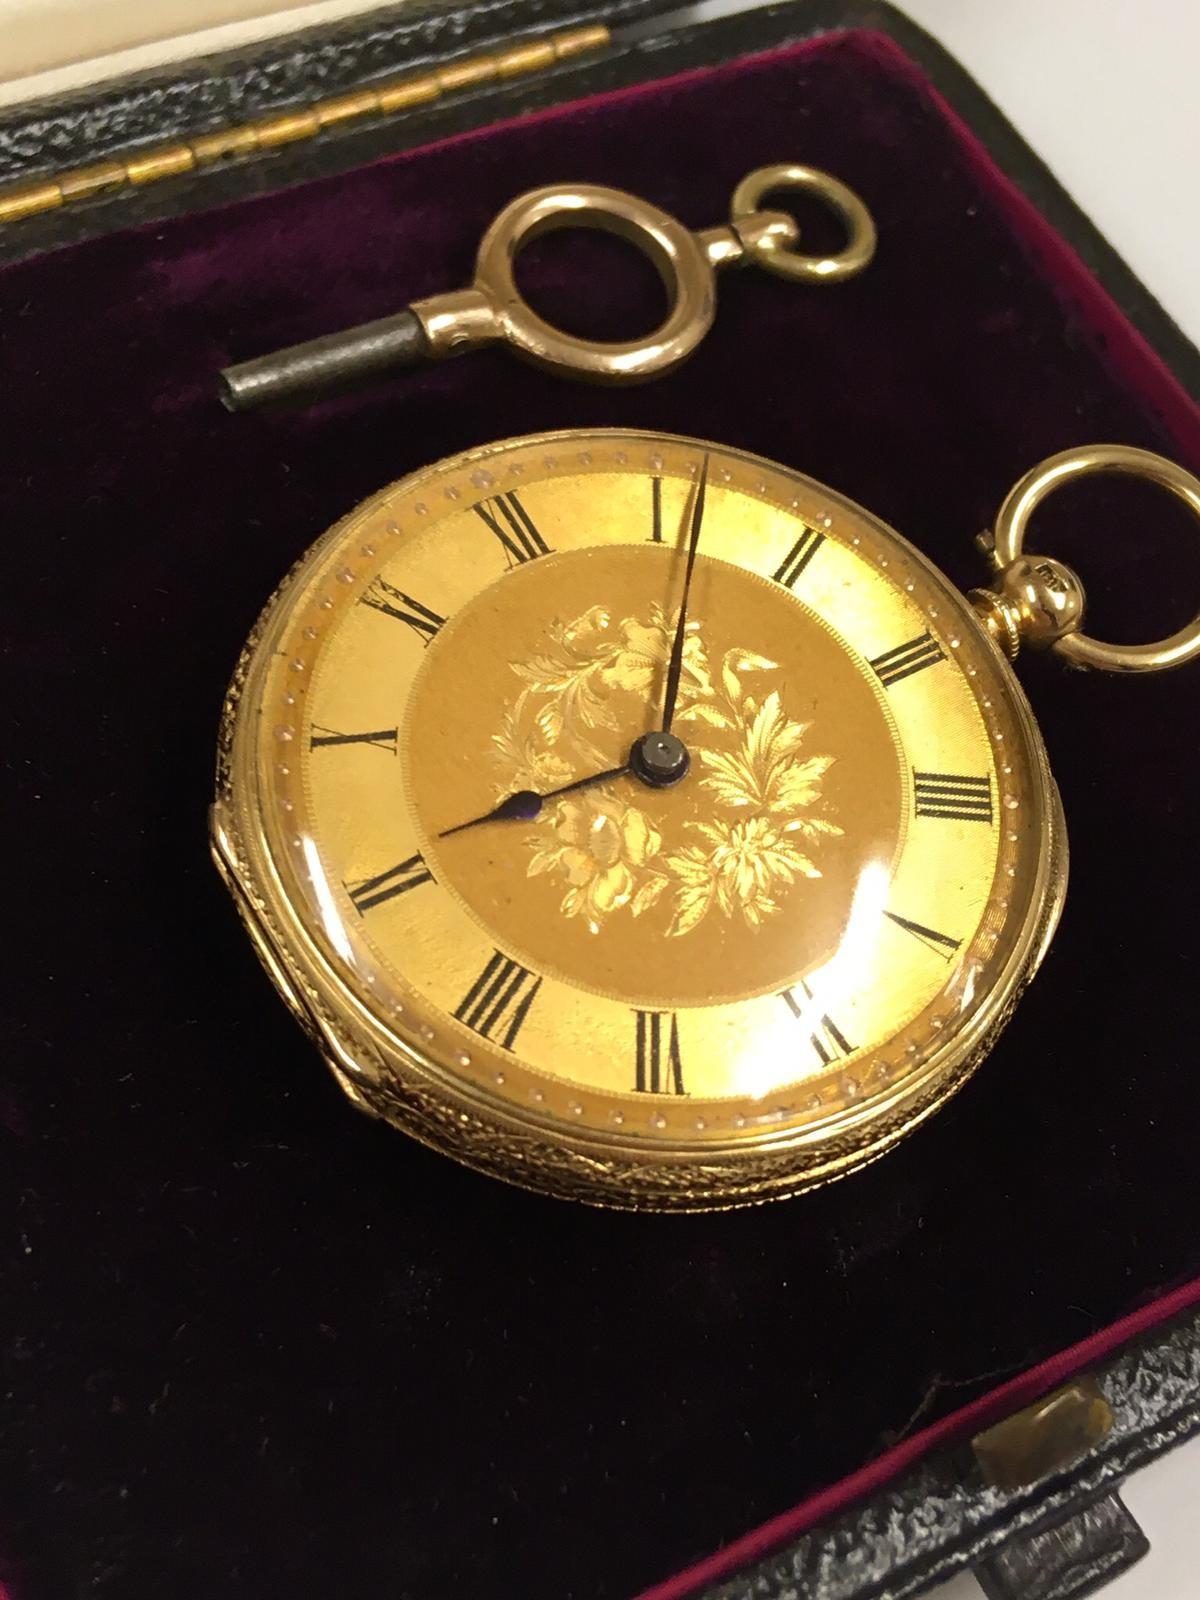 Antique 18k solid gold Pocket watch with key and box, 38mm diameter - Image 3 of 8